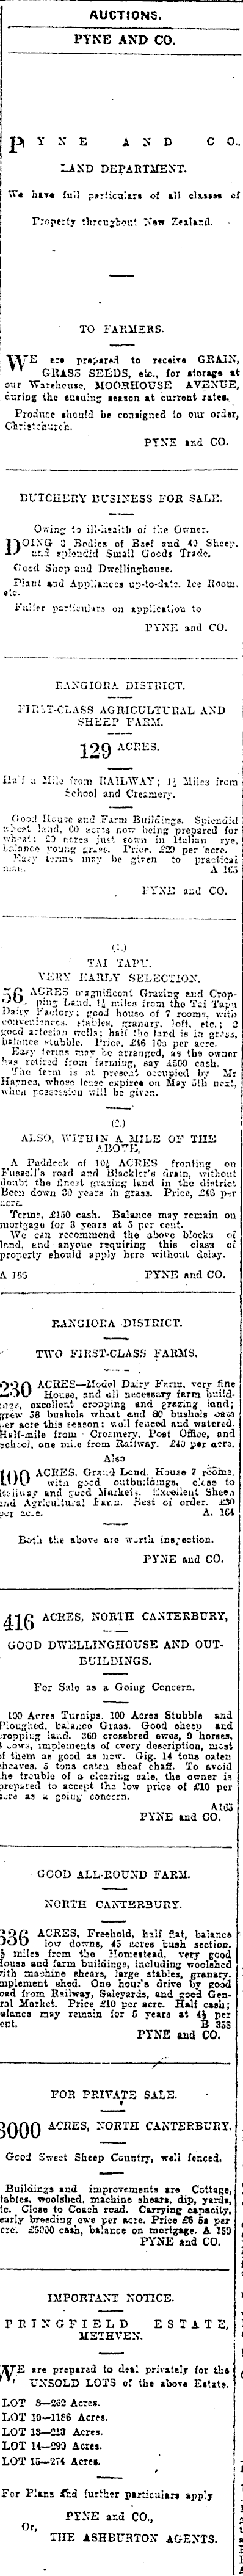 Papers Past Newspapers Press 17 April 1909 Page 15 Advertisements Column 5